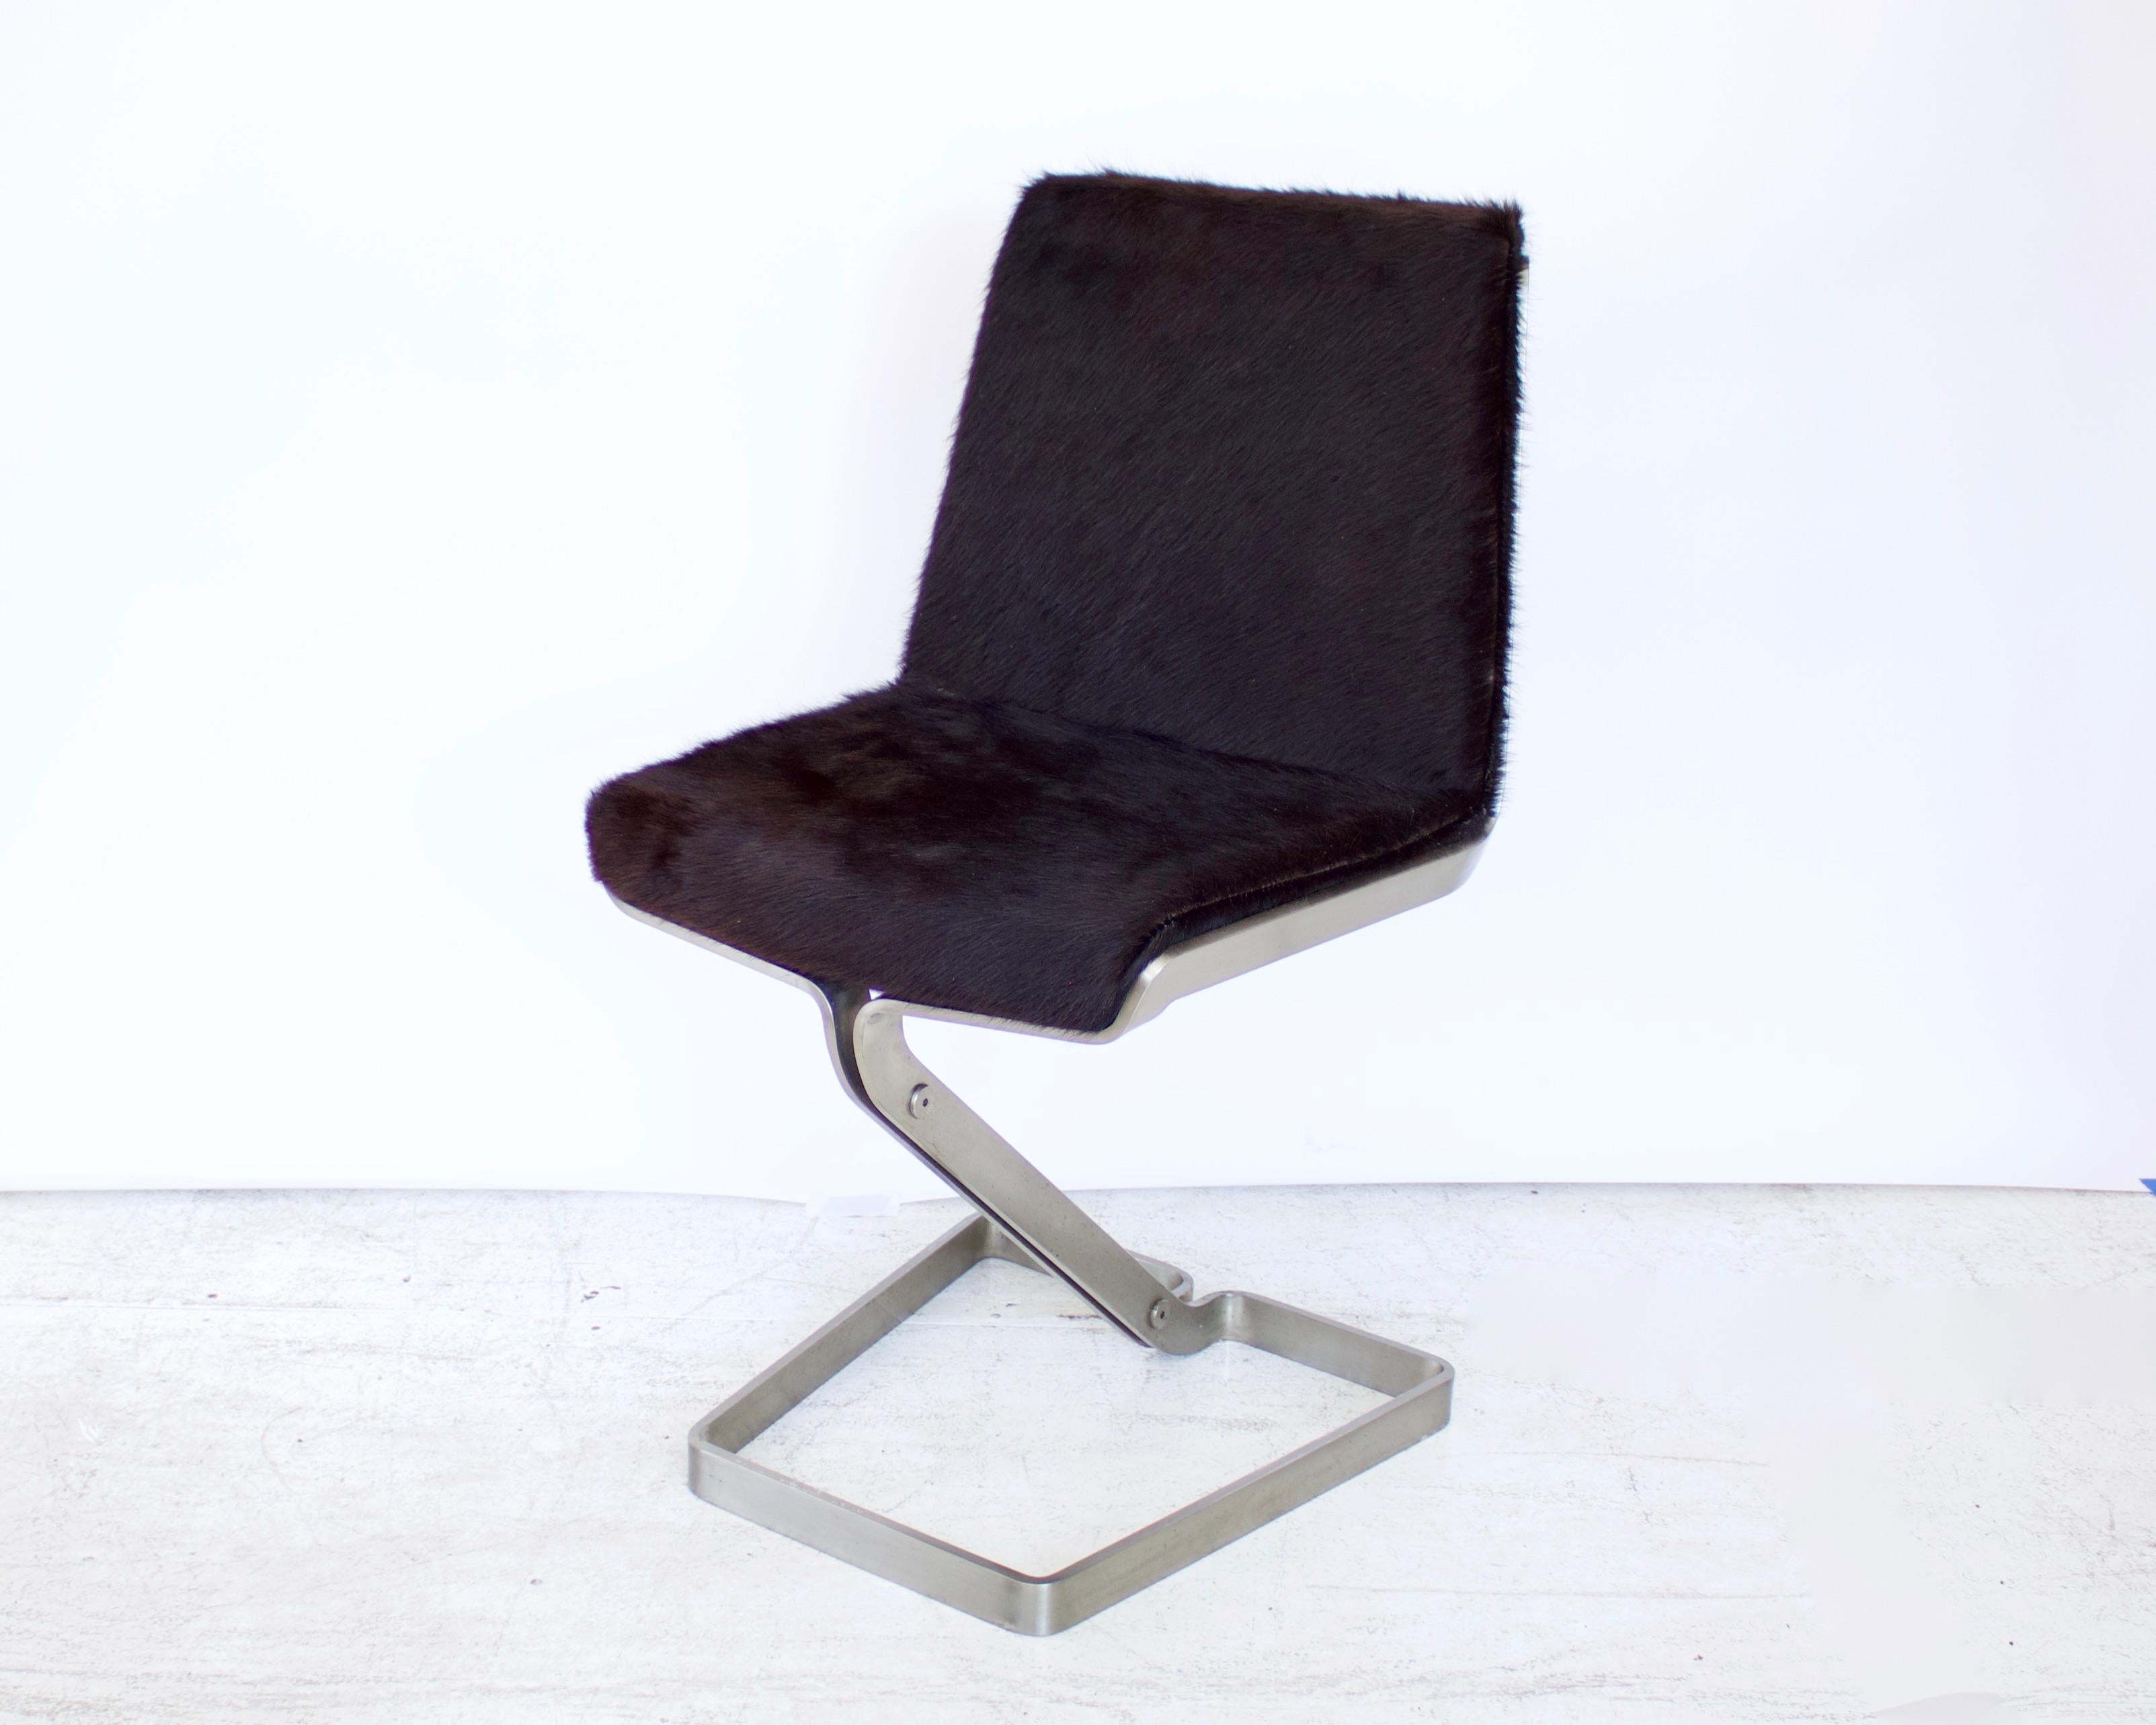 Italian Stainless Steel Desk Chair by Forma Nova, circa 1970 For Sale 2